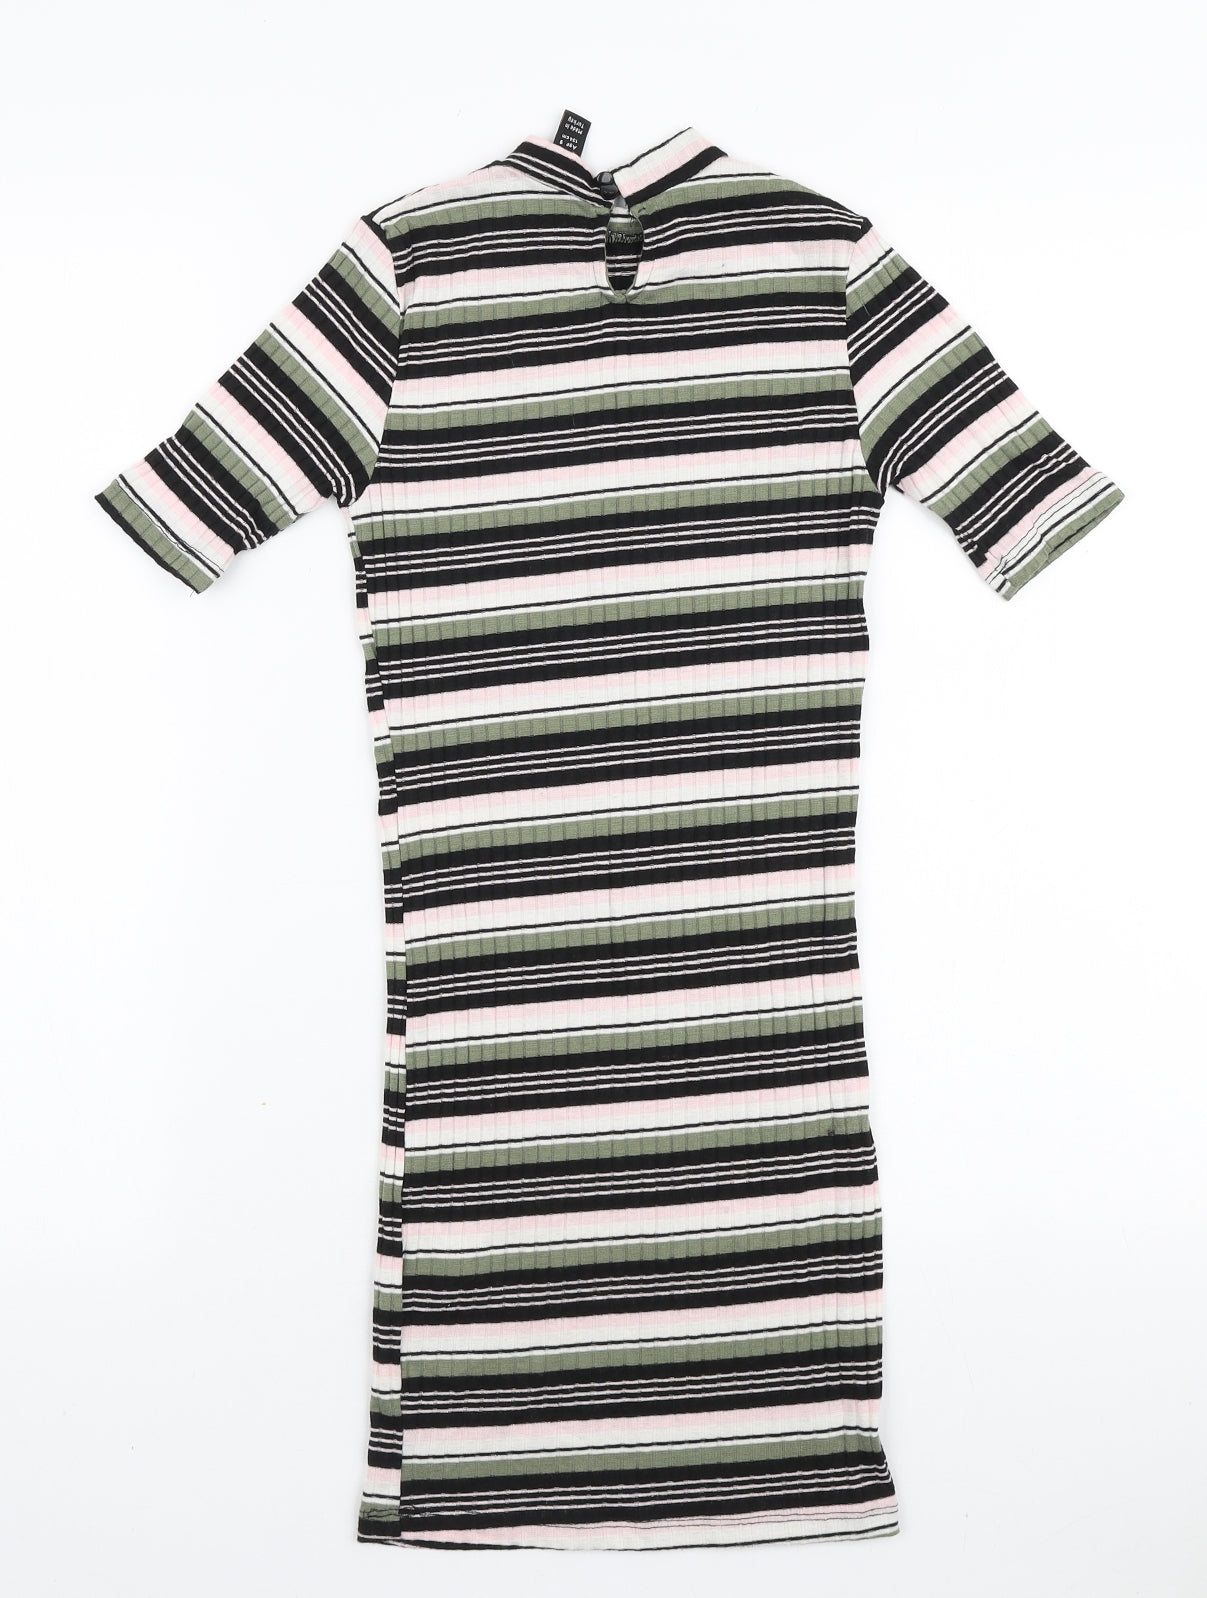 New Look Girls Multicoloured Striped Polyester T-Shirt Dress Size 9 Years Mock Neck Button